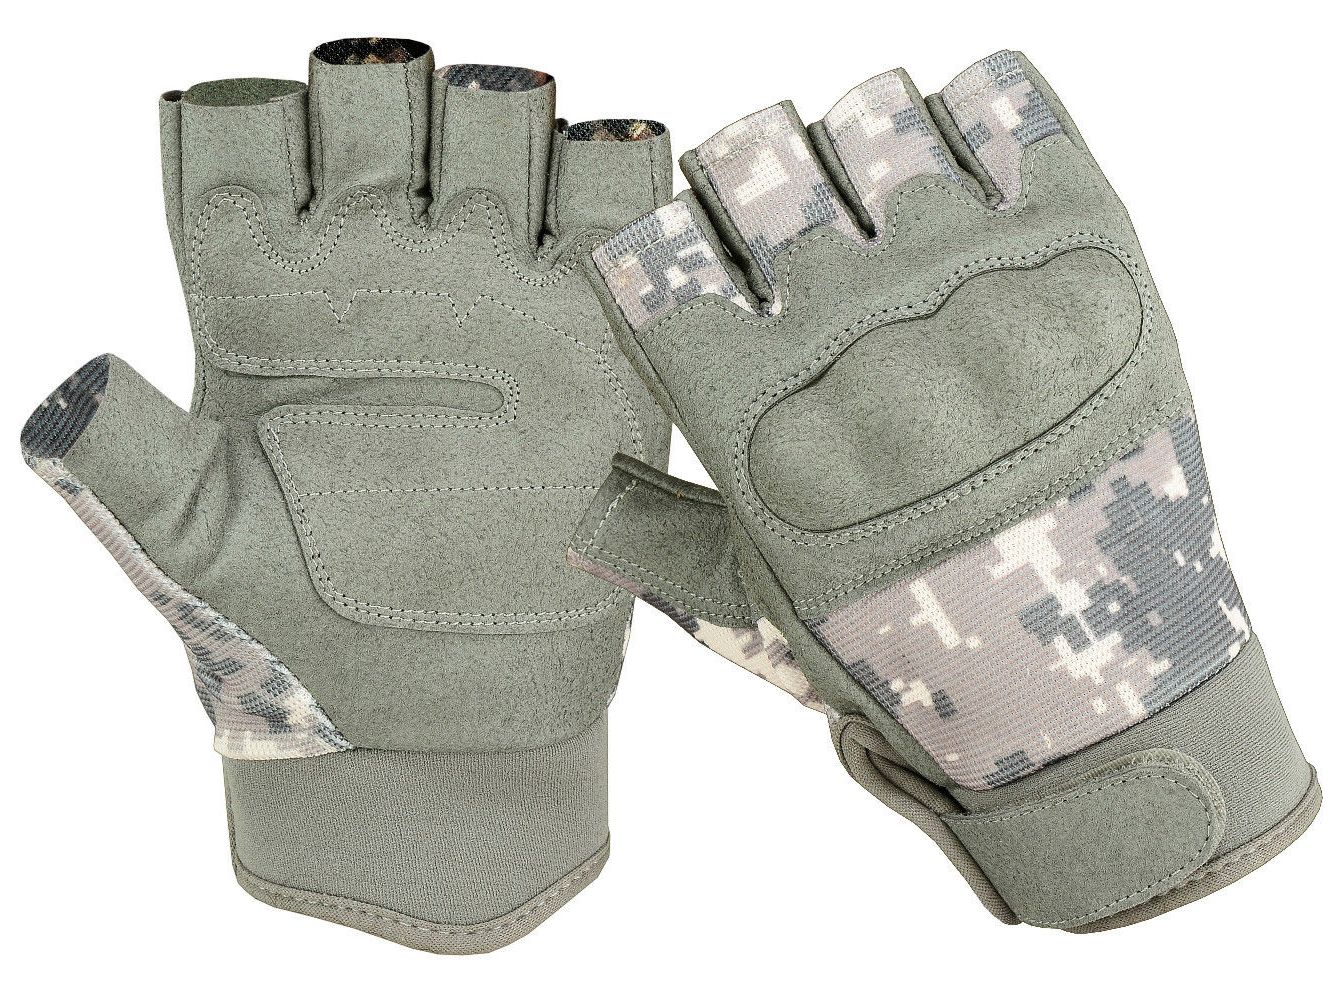 By Sportly Medium Tactical Fingerless Gloves 